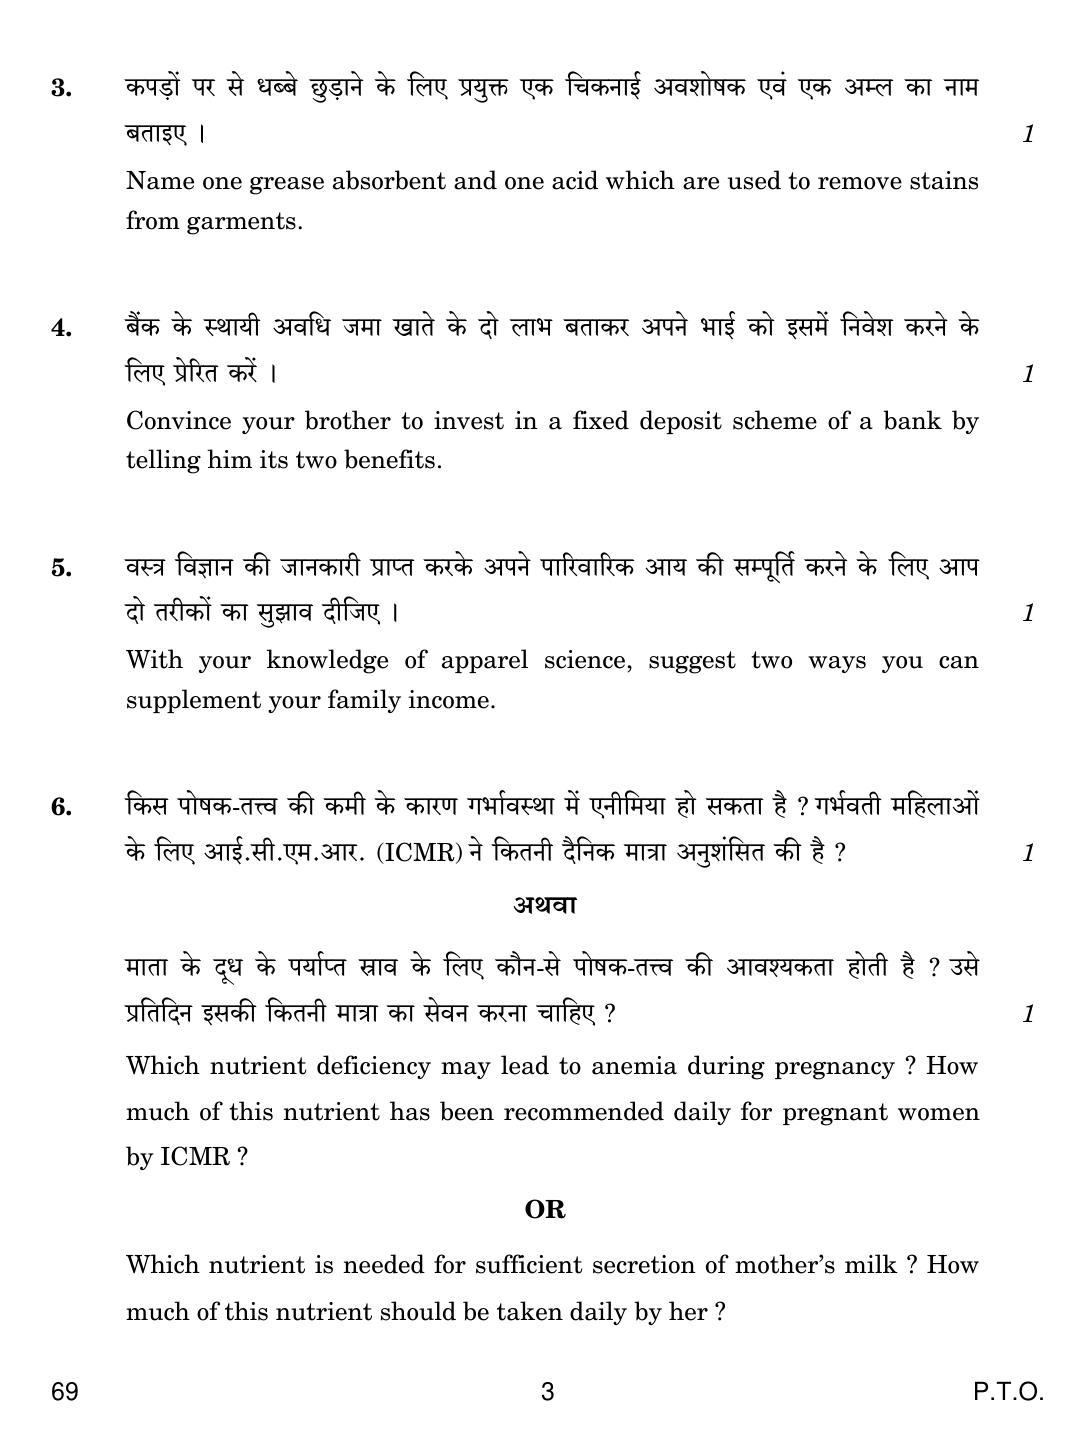 CBSE Class 12 69 Home Science 2019 Question Paper - Page 3